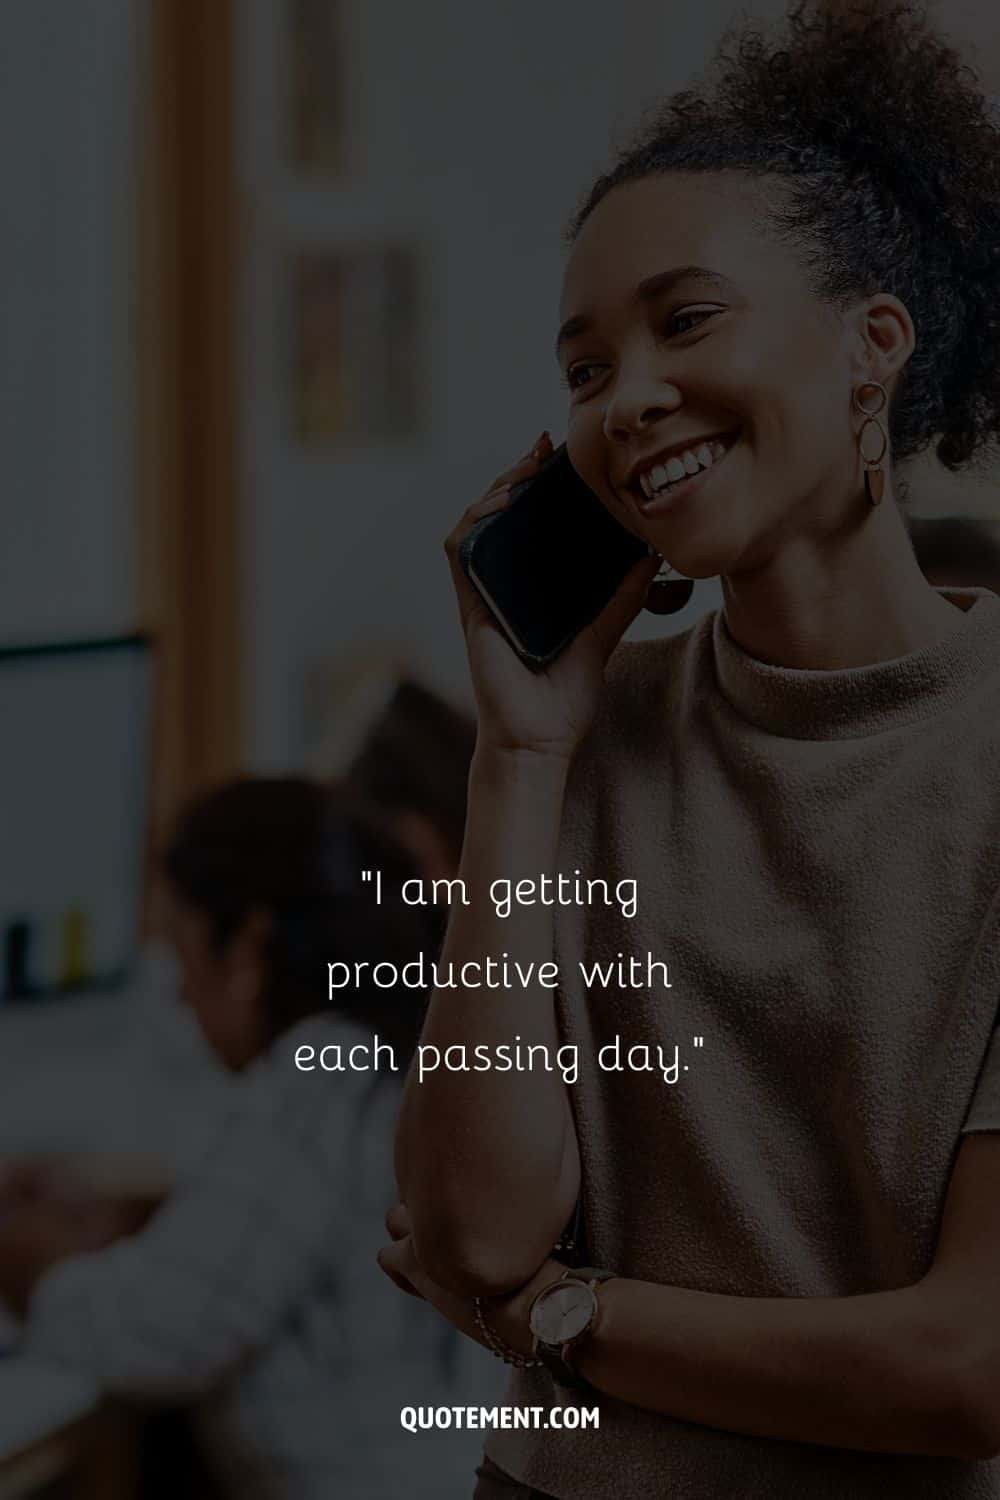 a smiling girl on the phone representing Thursday affirmation for work